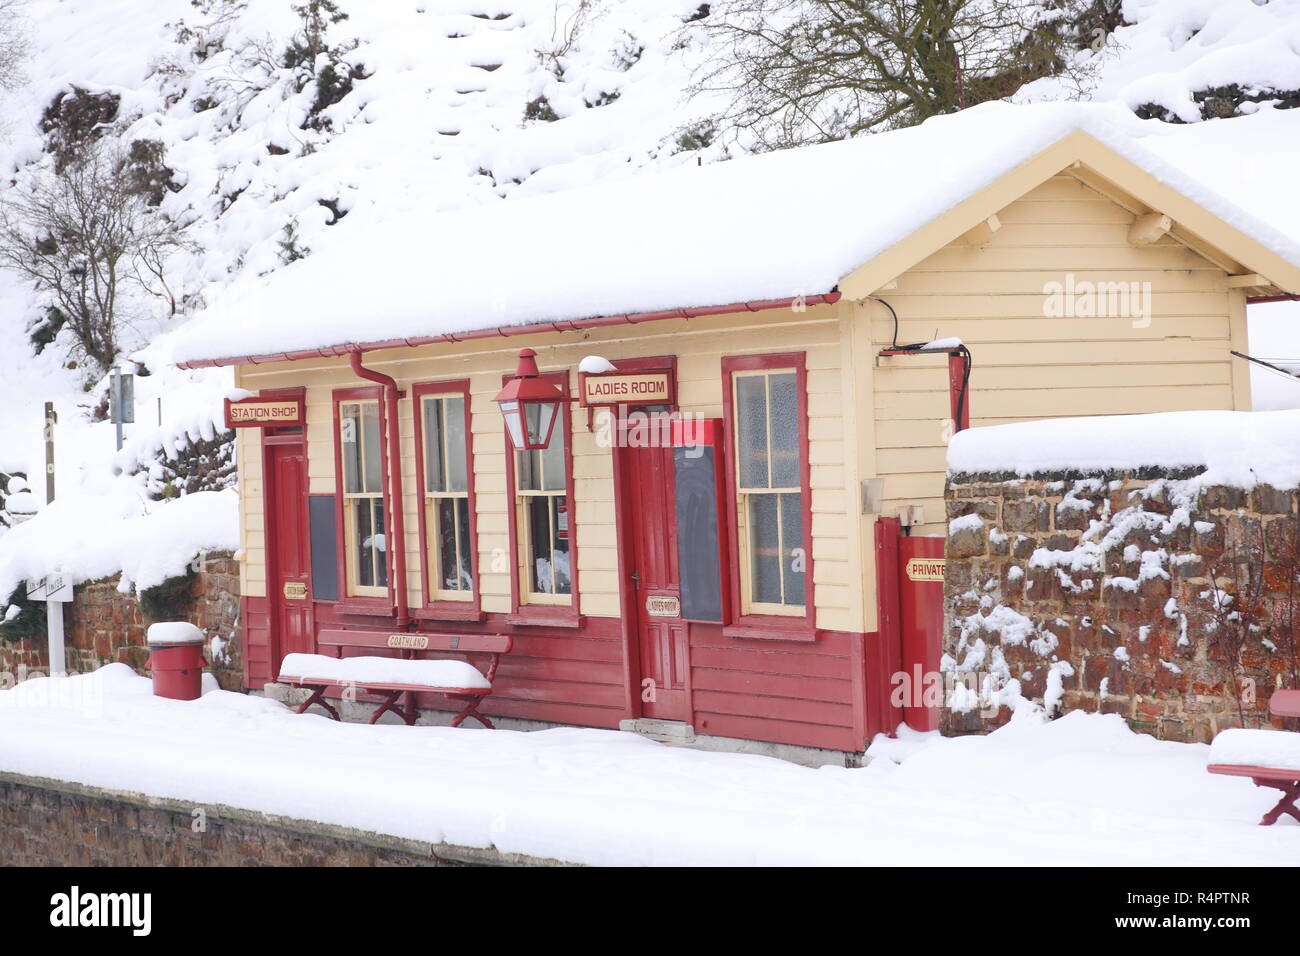 The gift shop and ladies room on the platform at Goathland Station on the North Yorkshire Moors Railway. Stock Photo